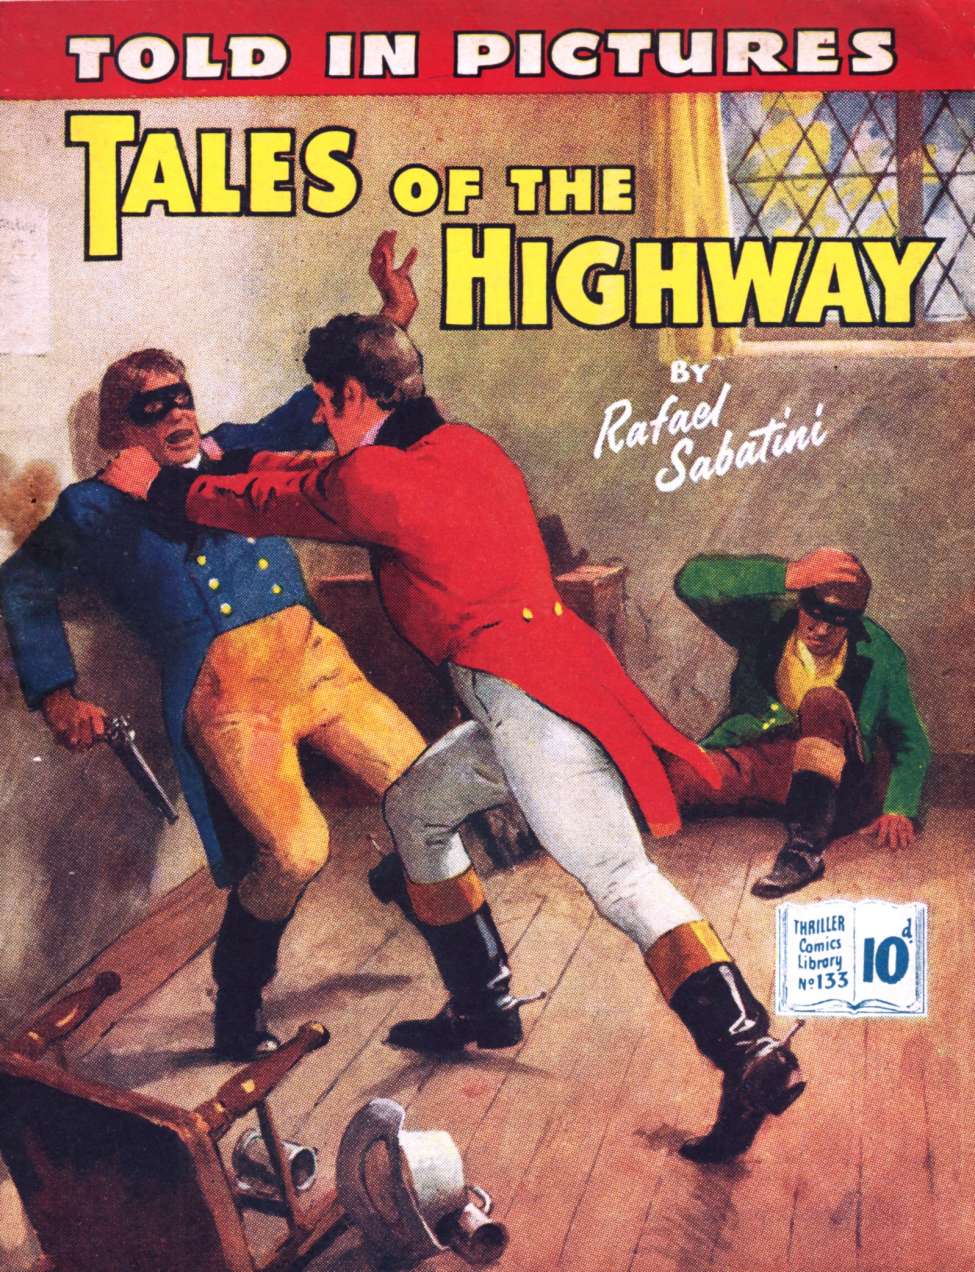 Book Cover For Thriller Comics Library 133 - Tales of the Highway